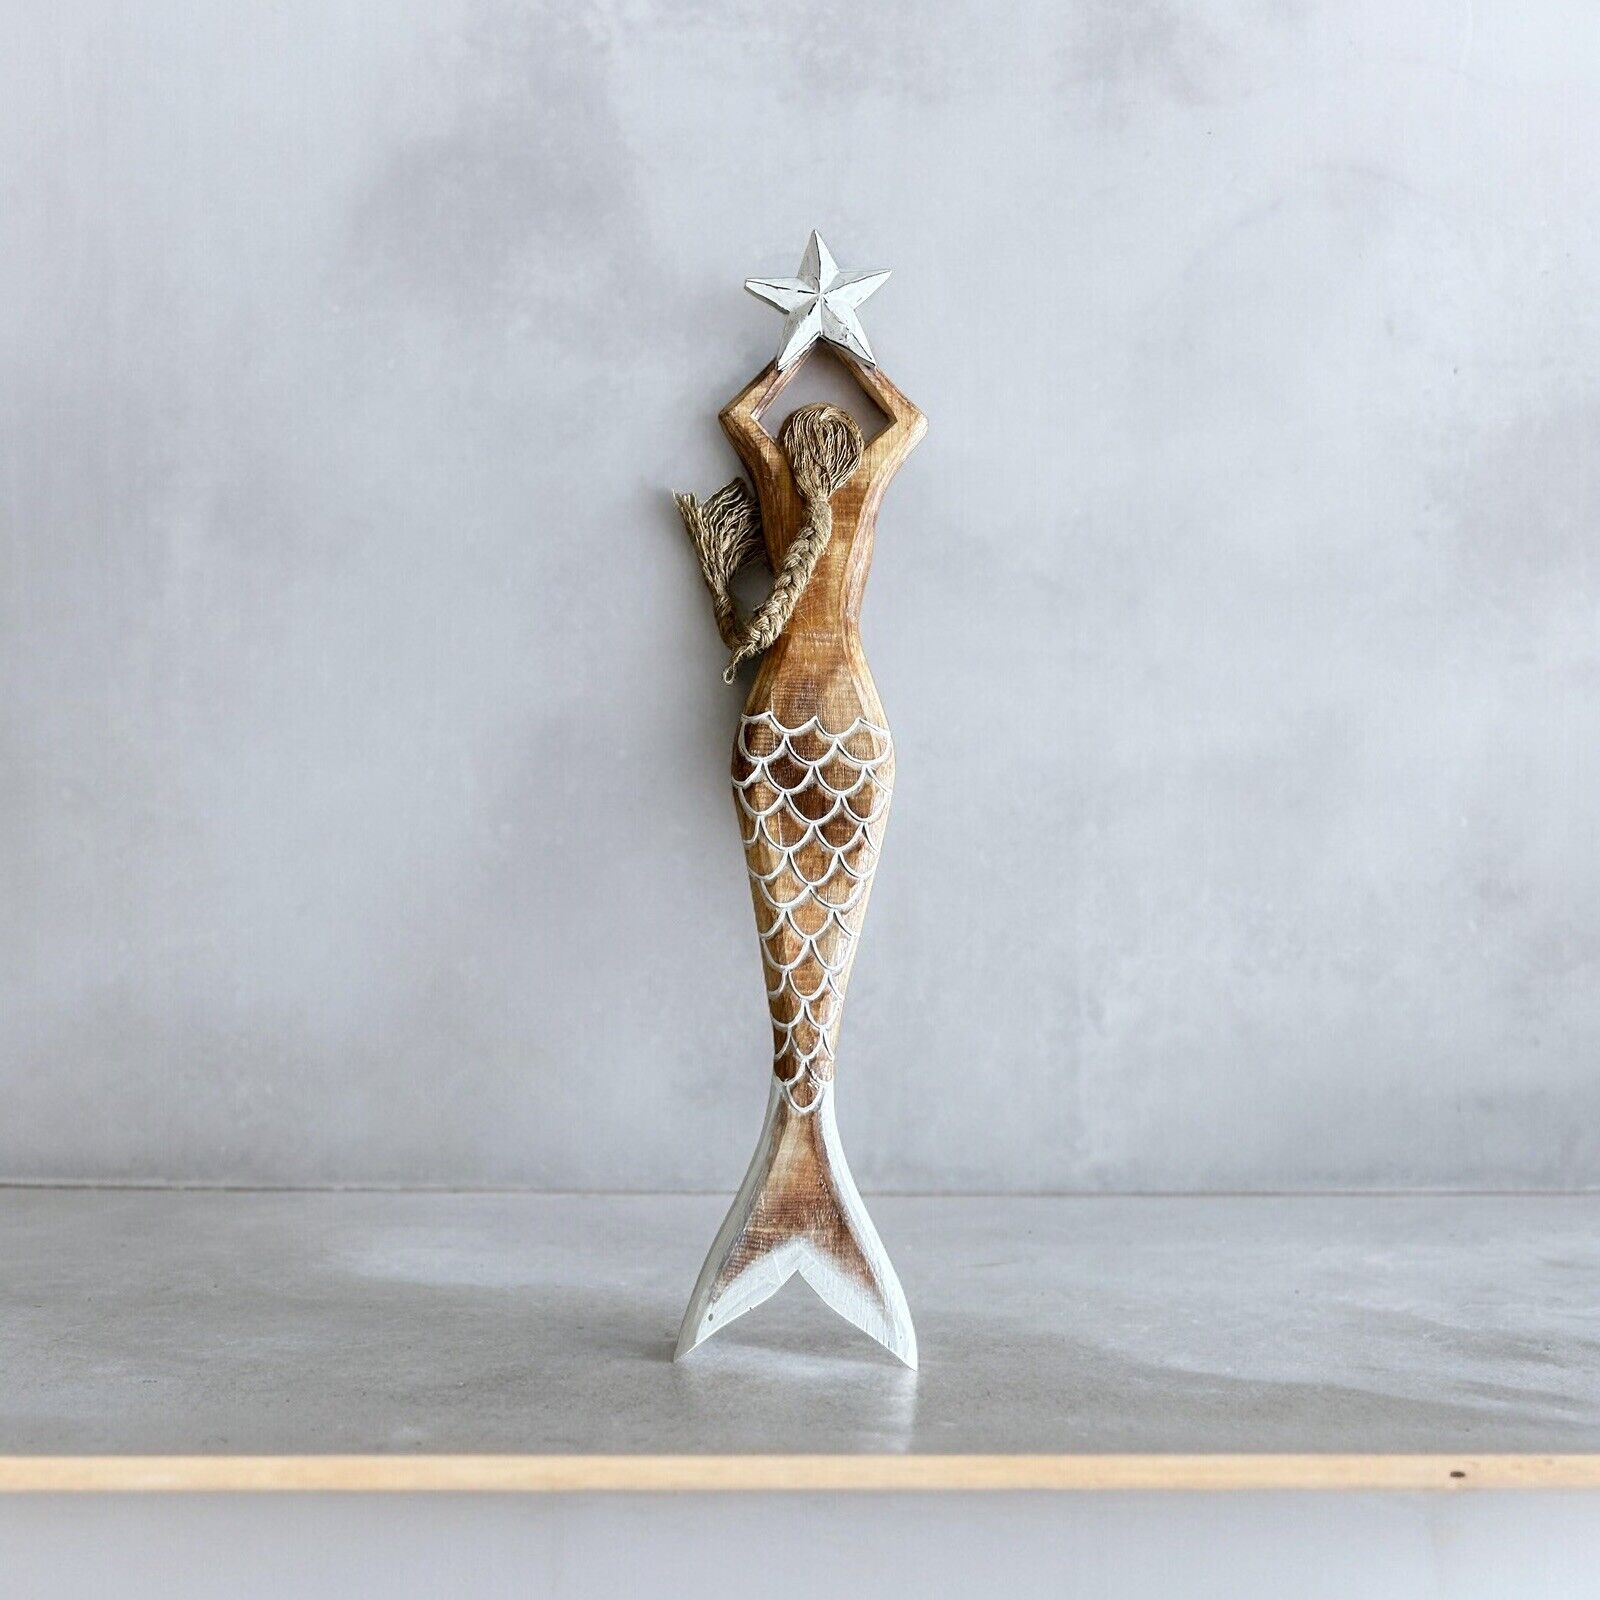 33” Hand Carved & Painted Mermaid Wooden - Coastal Home decor - Wedding Gift